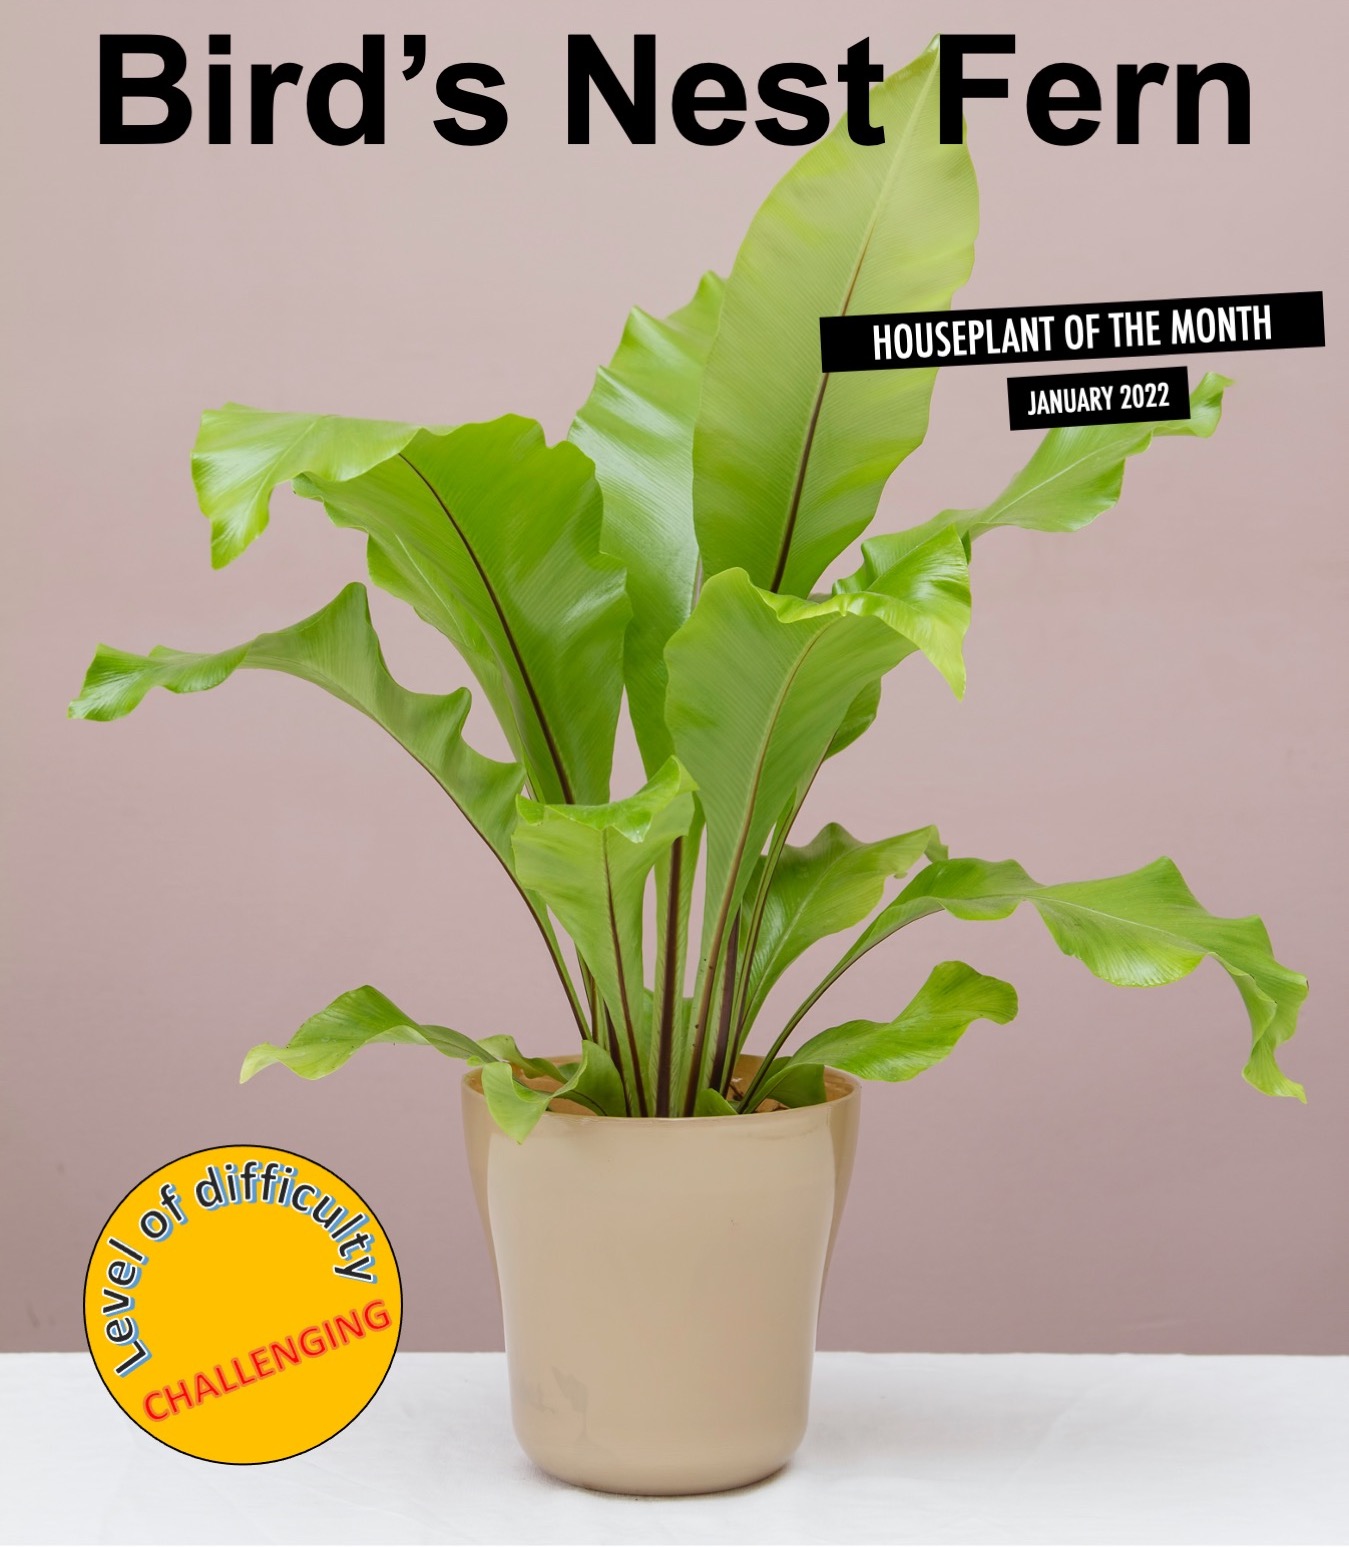 Bird's Nest Fern: The January 2022 Houseplant of the Month